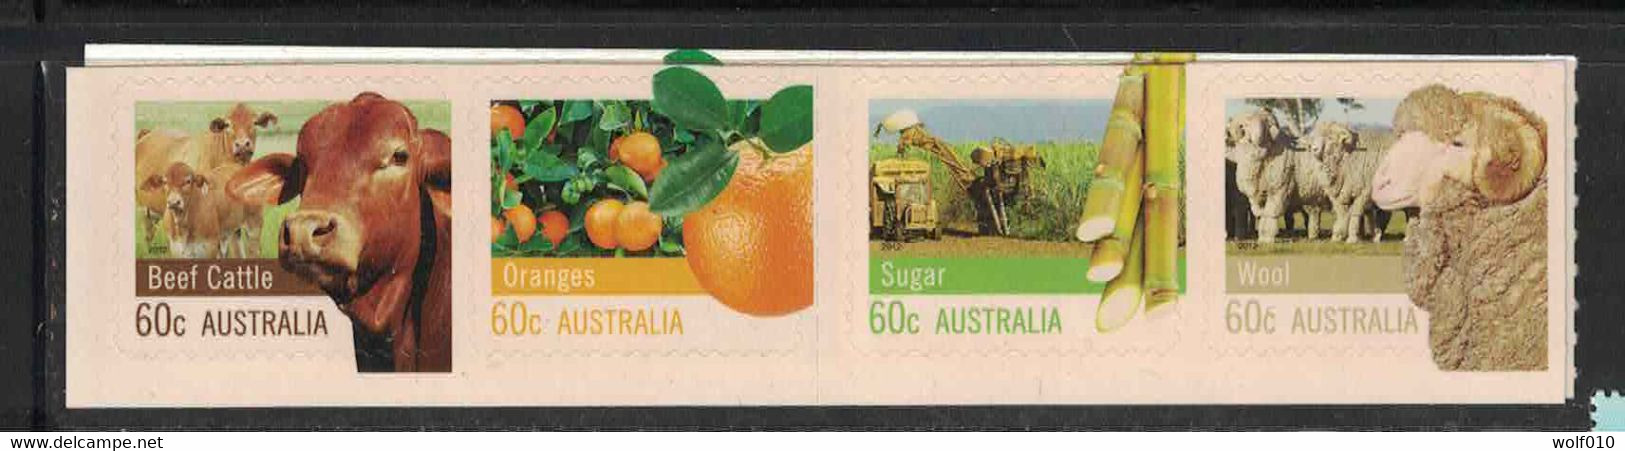 Australia. 2012. Farm Products. MNH Strip Of  4 From Booklet. SCV = 5.00 - Agriculture